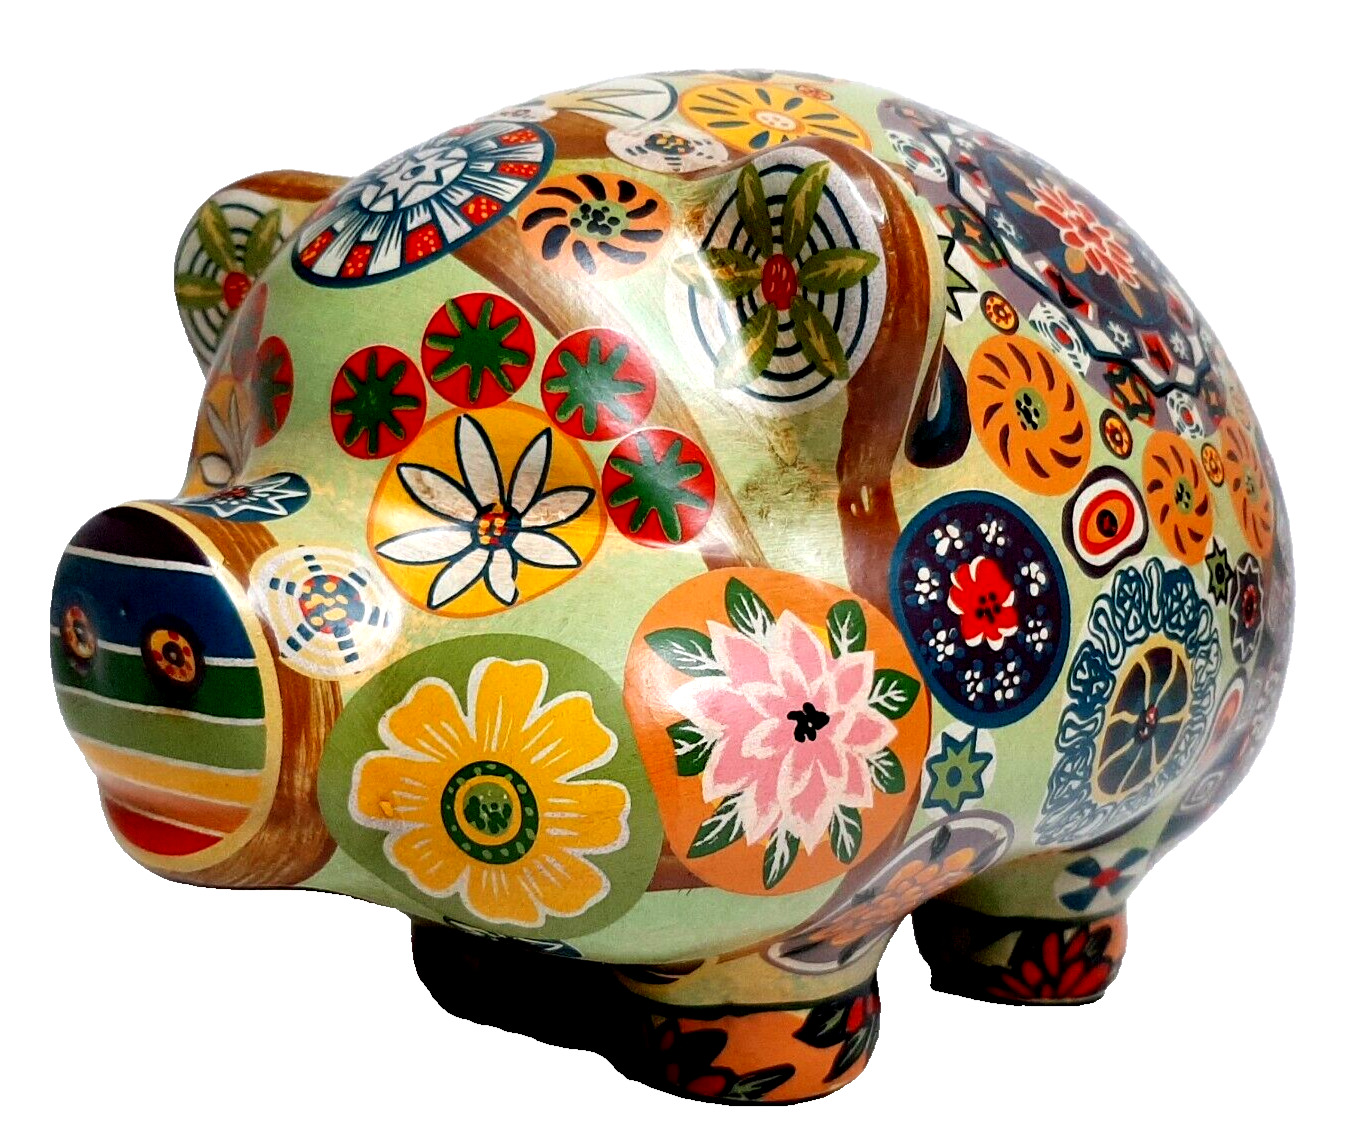 Day of the Dead Piggy Bank Vintage Ceramic Boho Hippie Flower Power Coin Bank